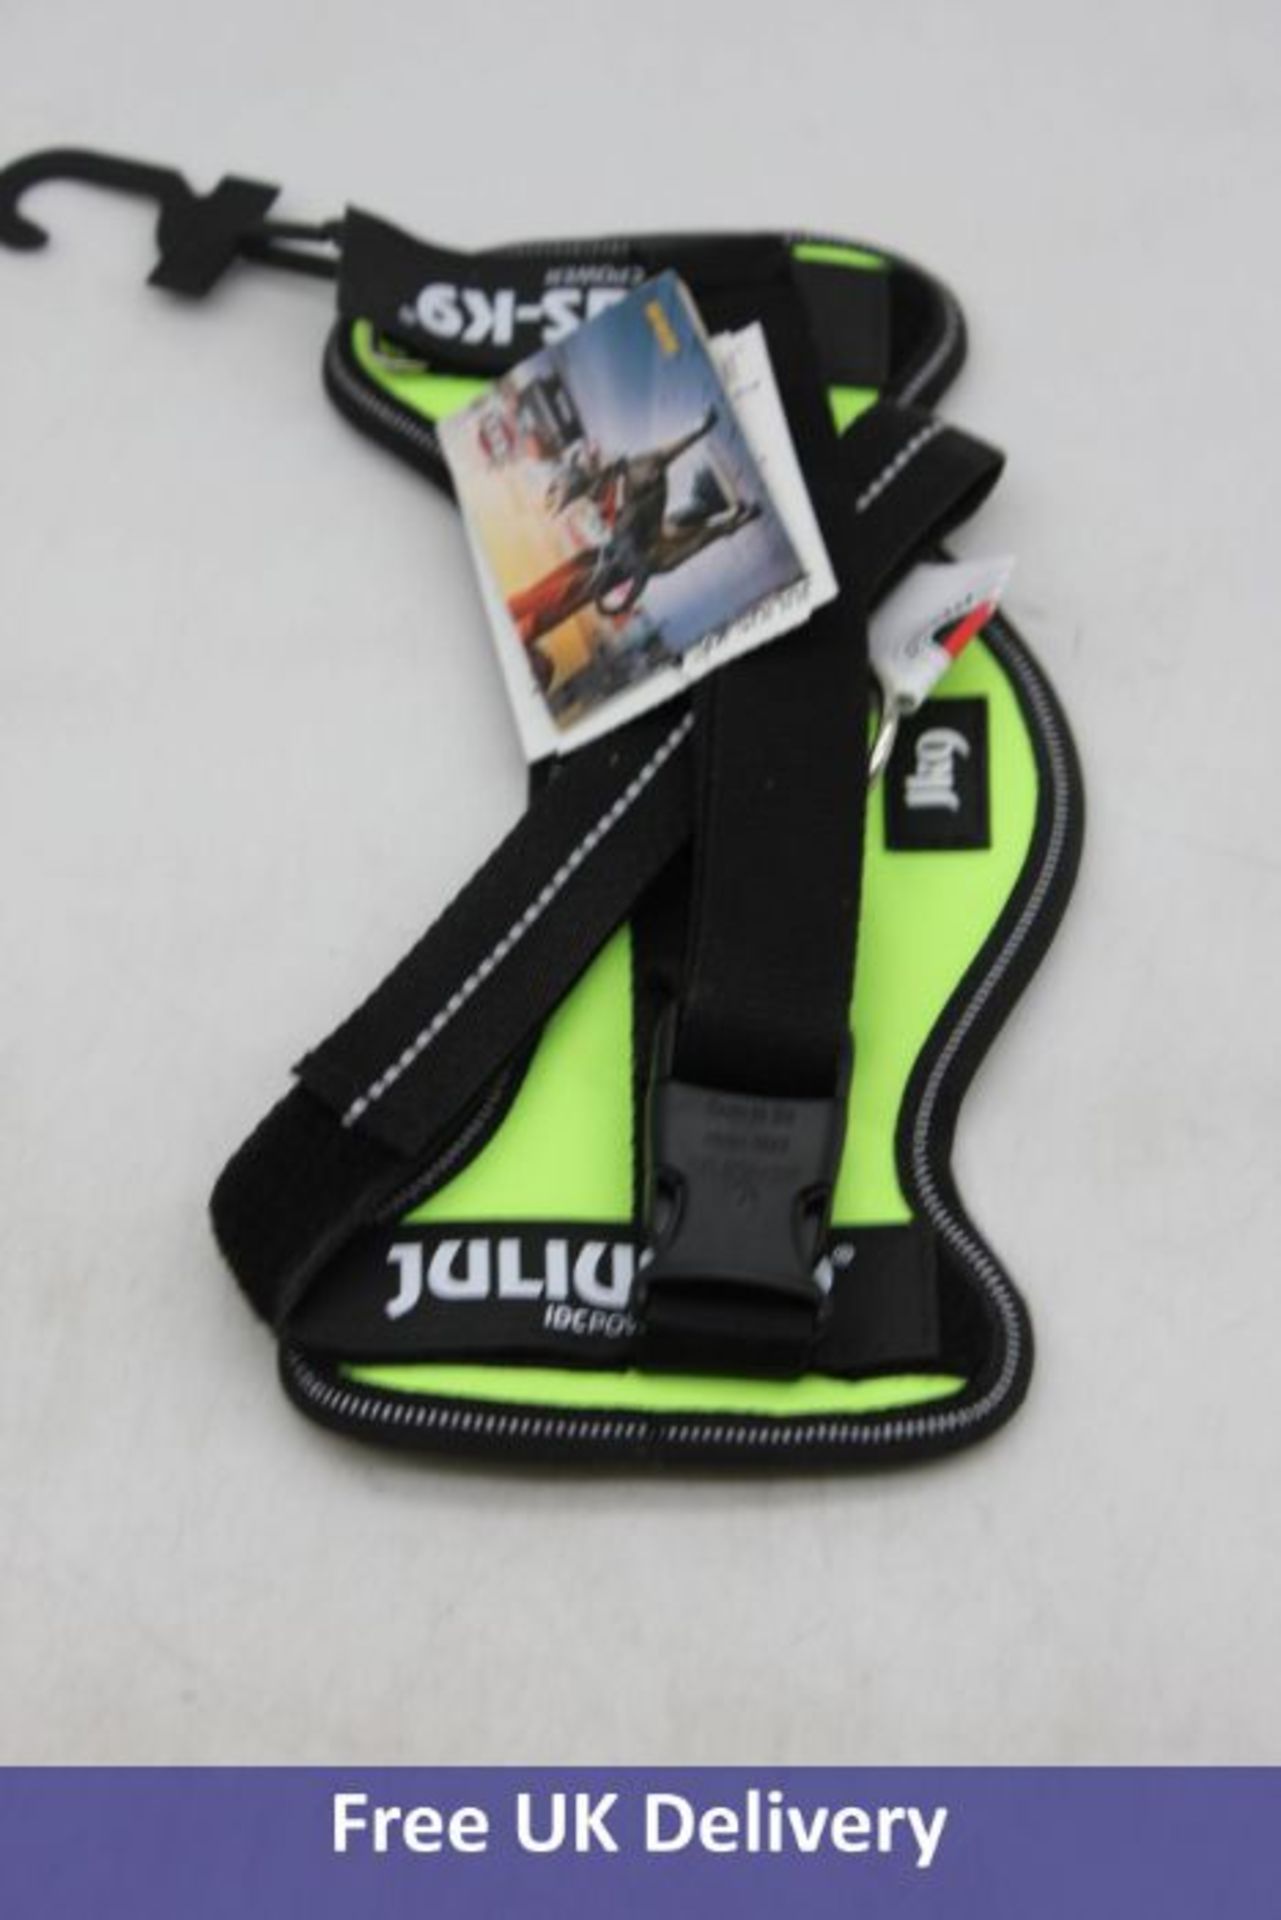 Six Julius-K9 Power Harness to include 1x Green, S, 51-67cm, 1x Black, S, 51-67cm, 1x Red, M, 58-76